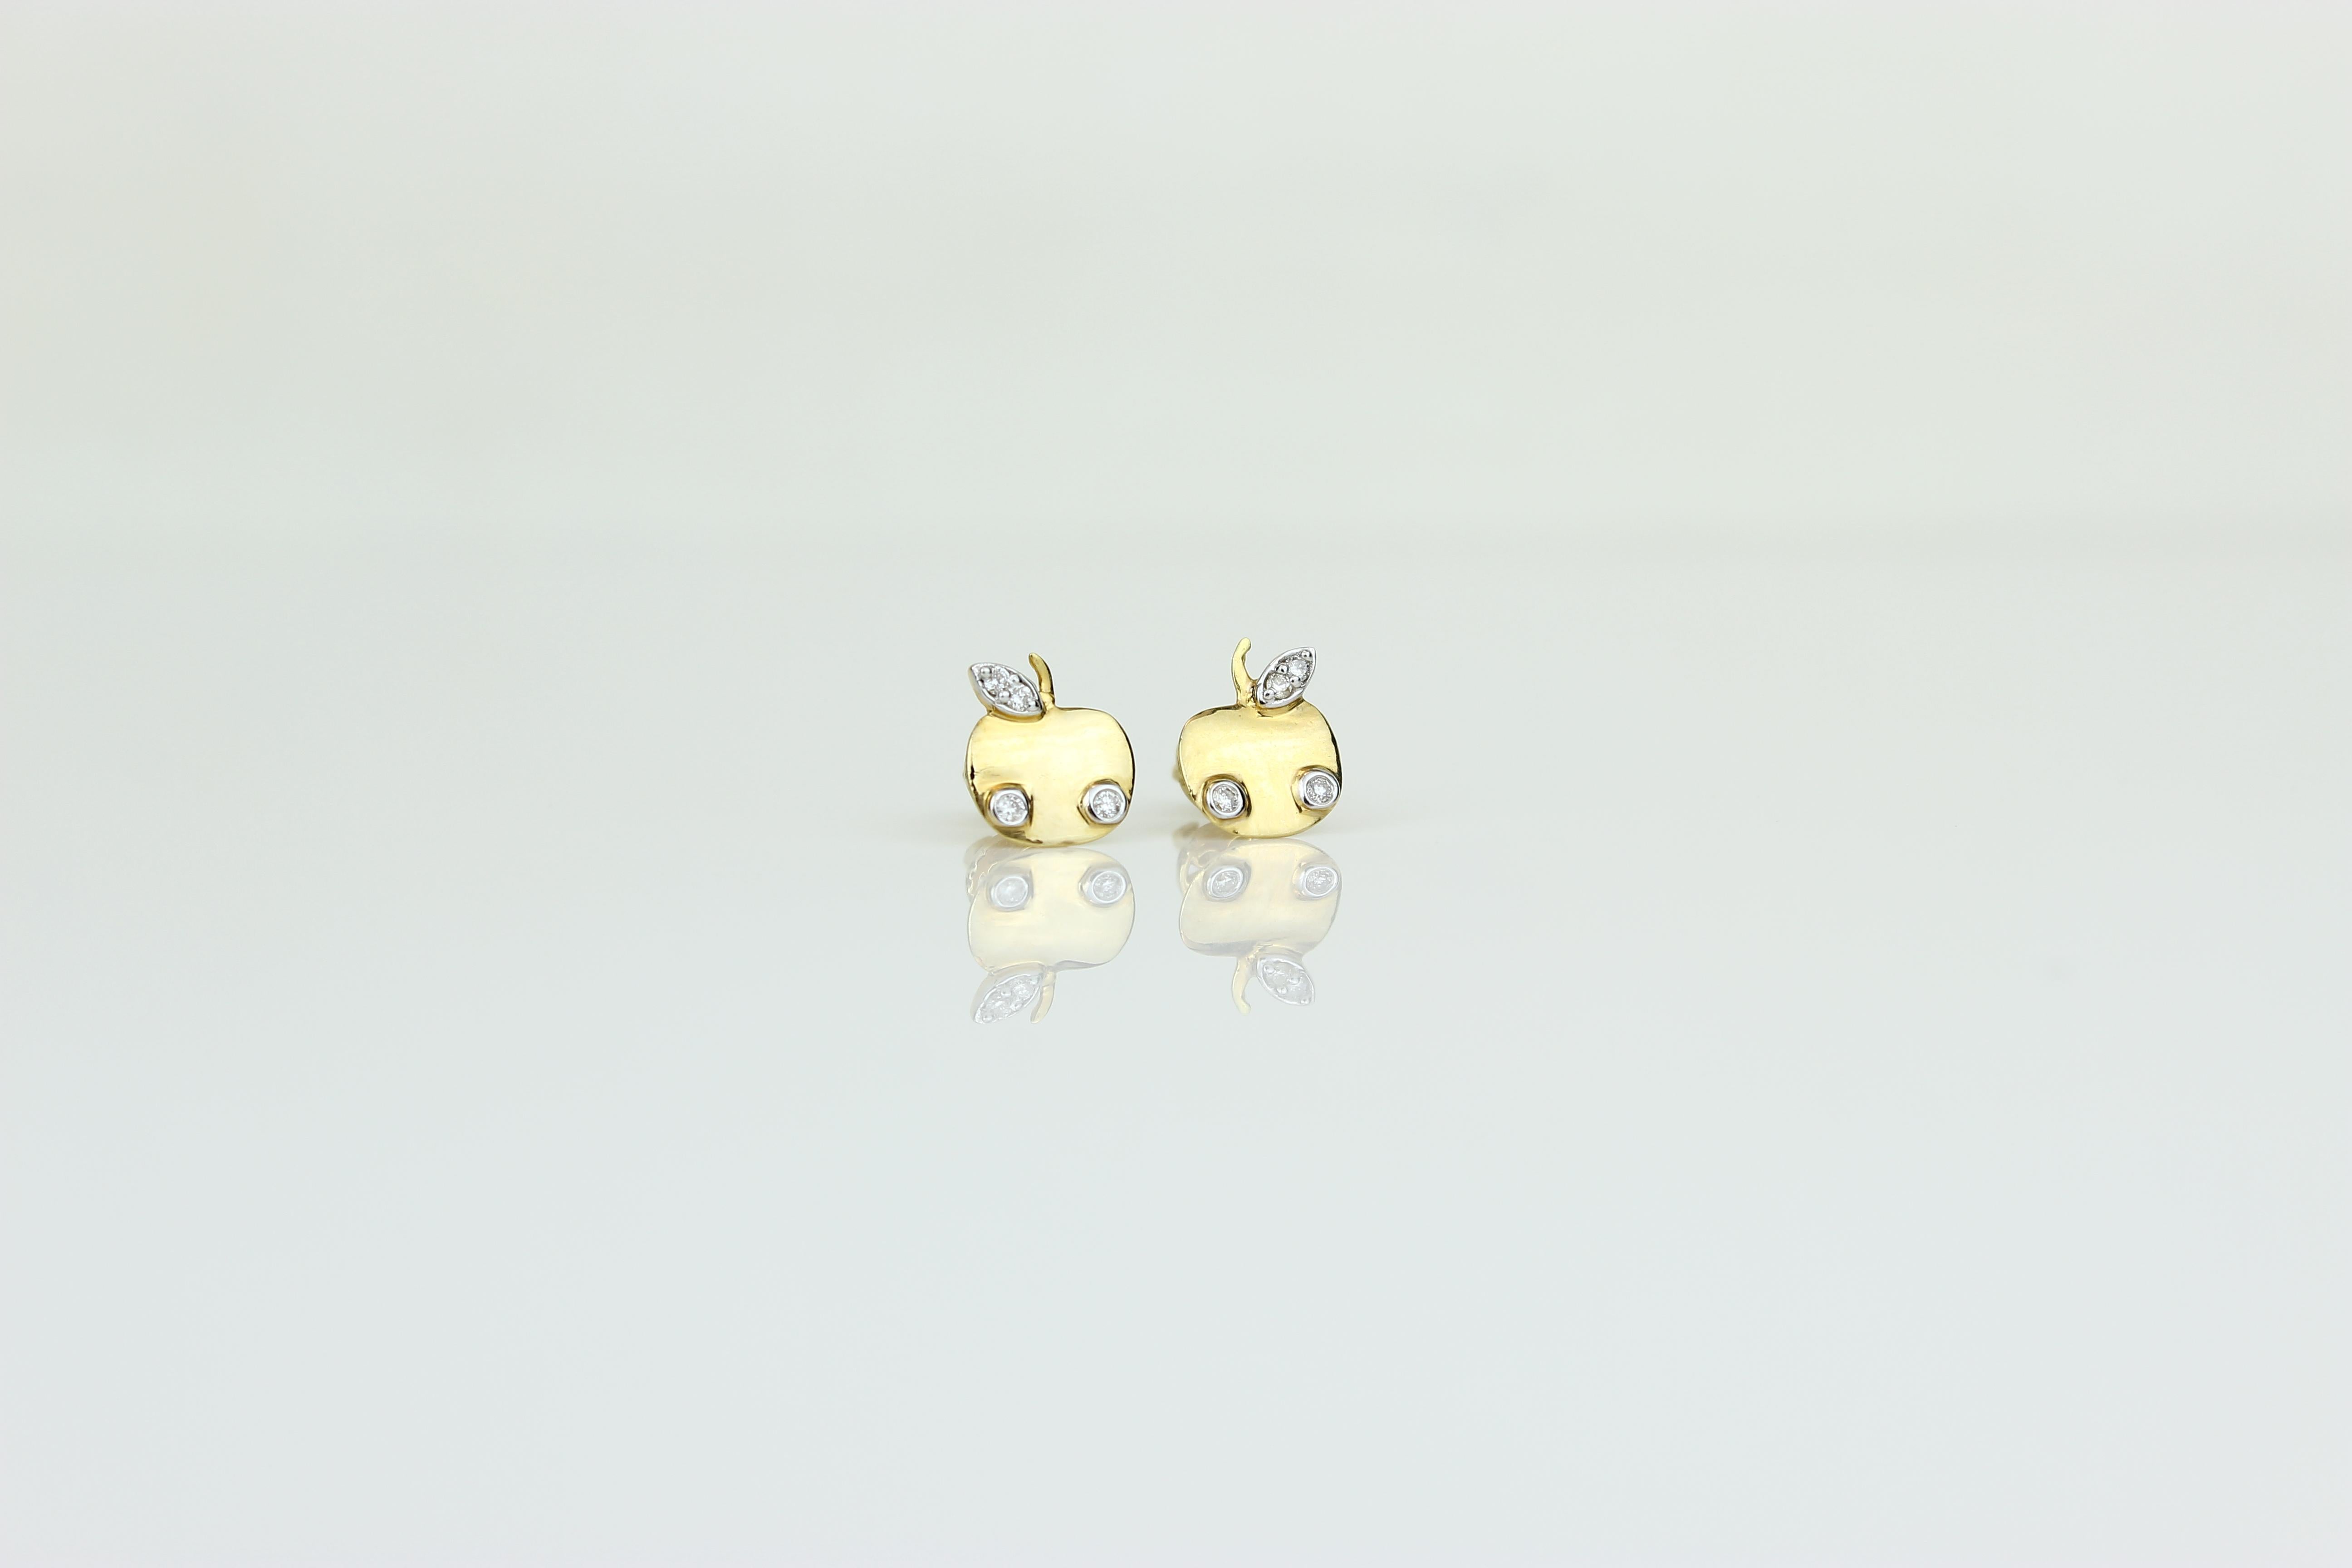 The Apple Diamond Kid Earrings are a charming and playful accessory for young fashion enthusiasts. Crafted from 18K solid gold, these earrings feature a delightful apple design adorned with shimmering diamonds. With their whimsical appeal and